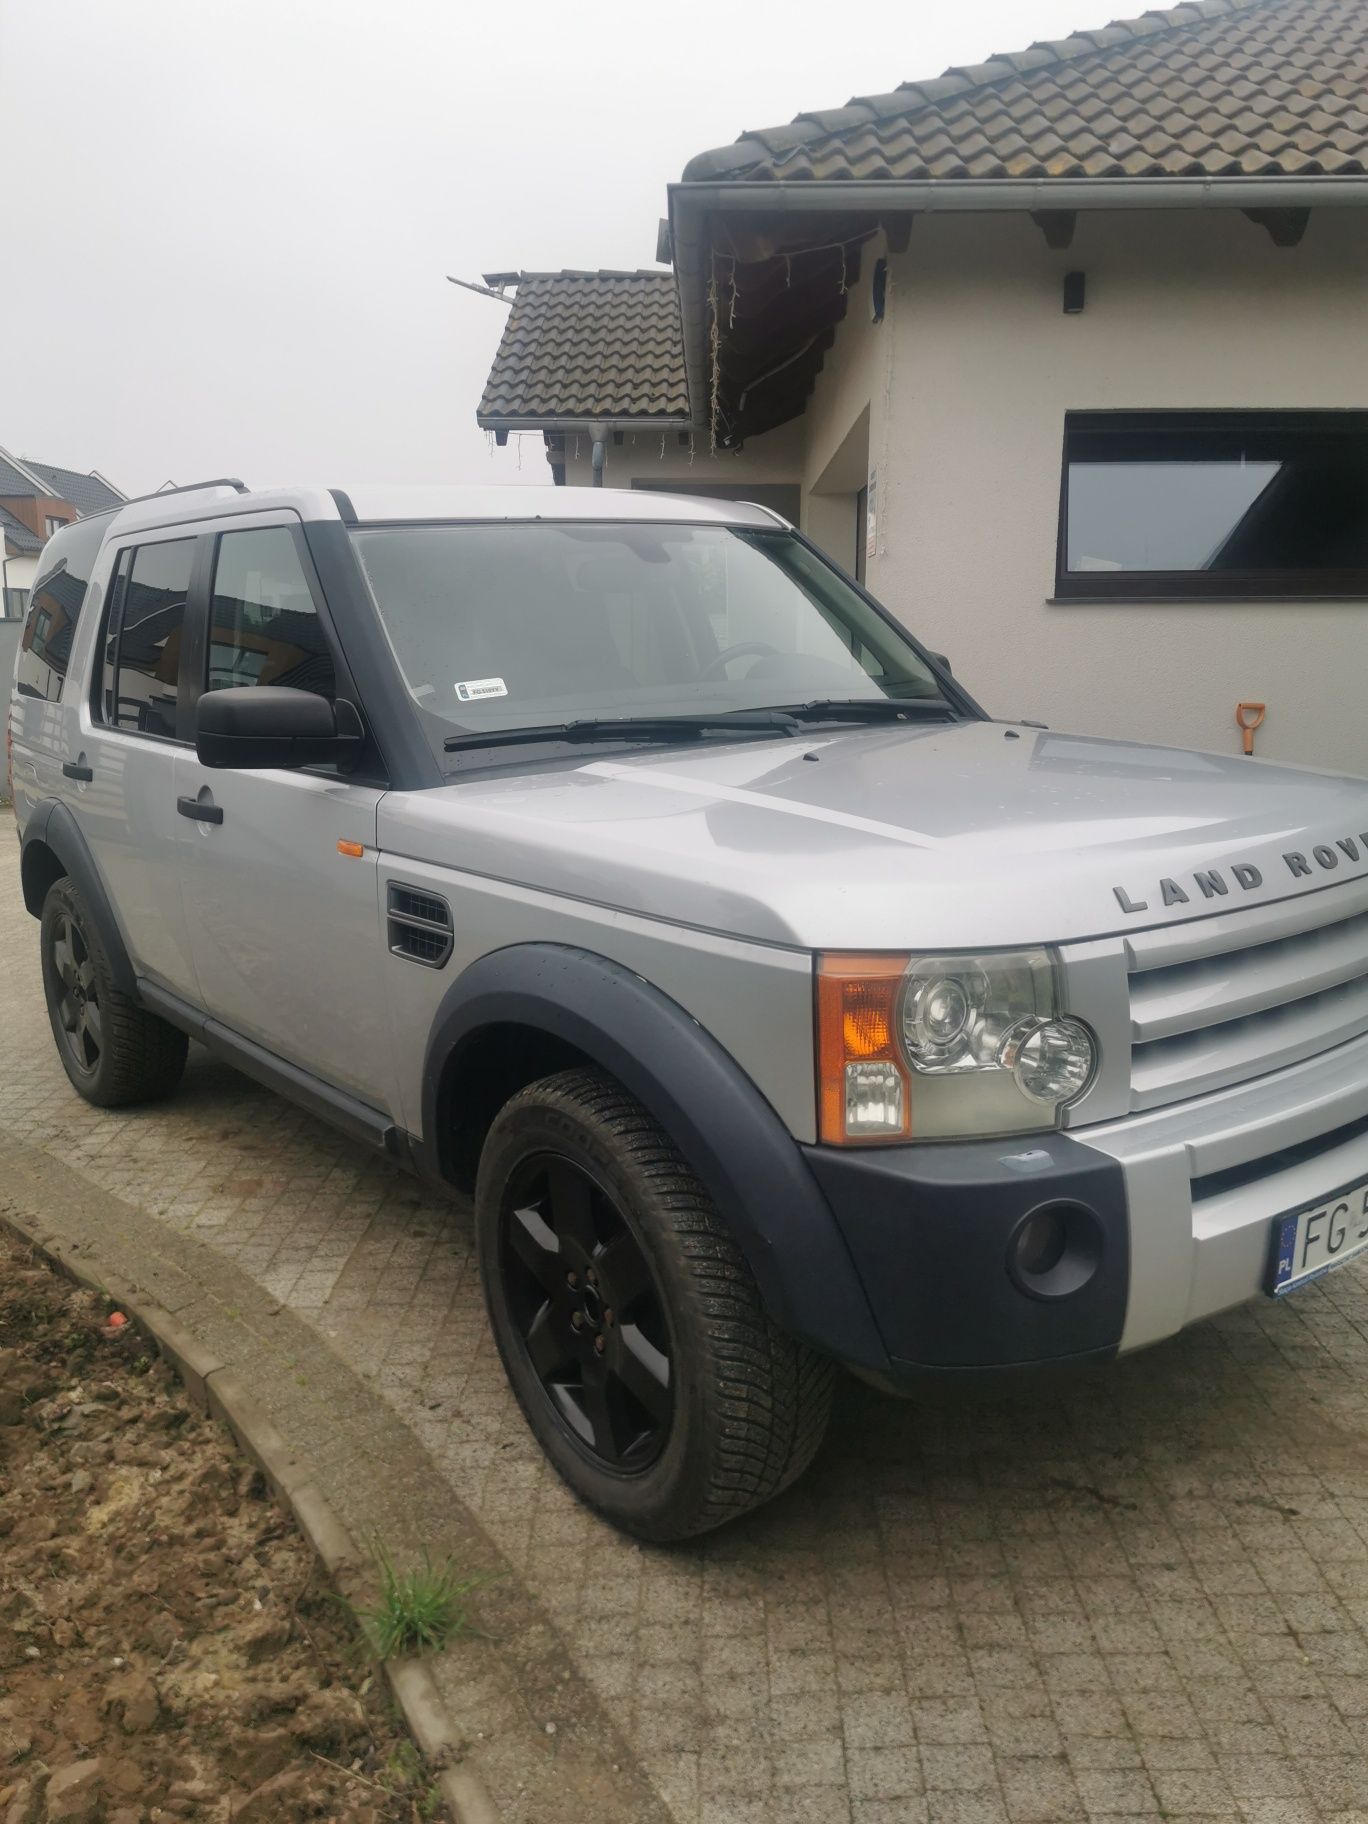 Land Rover Discovery 3 4.4